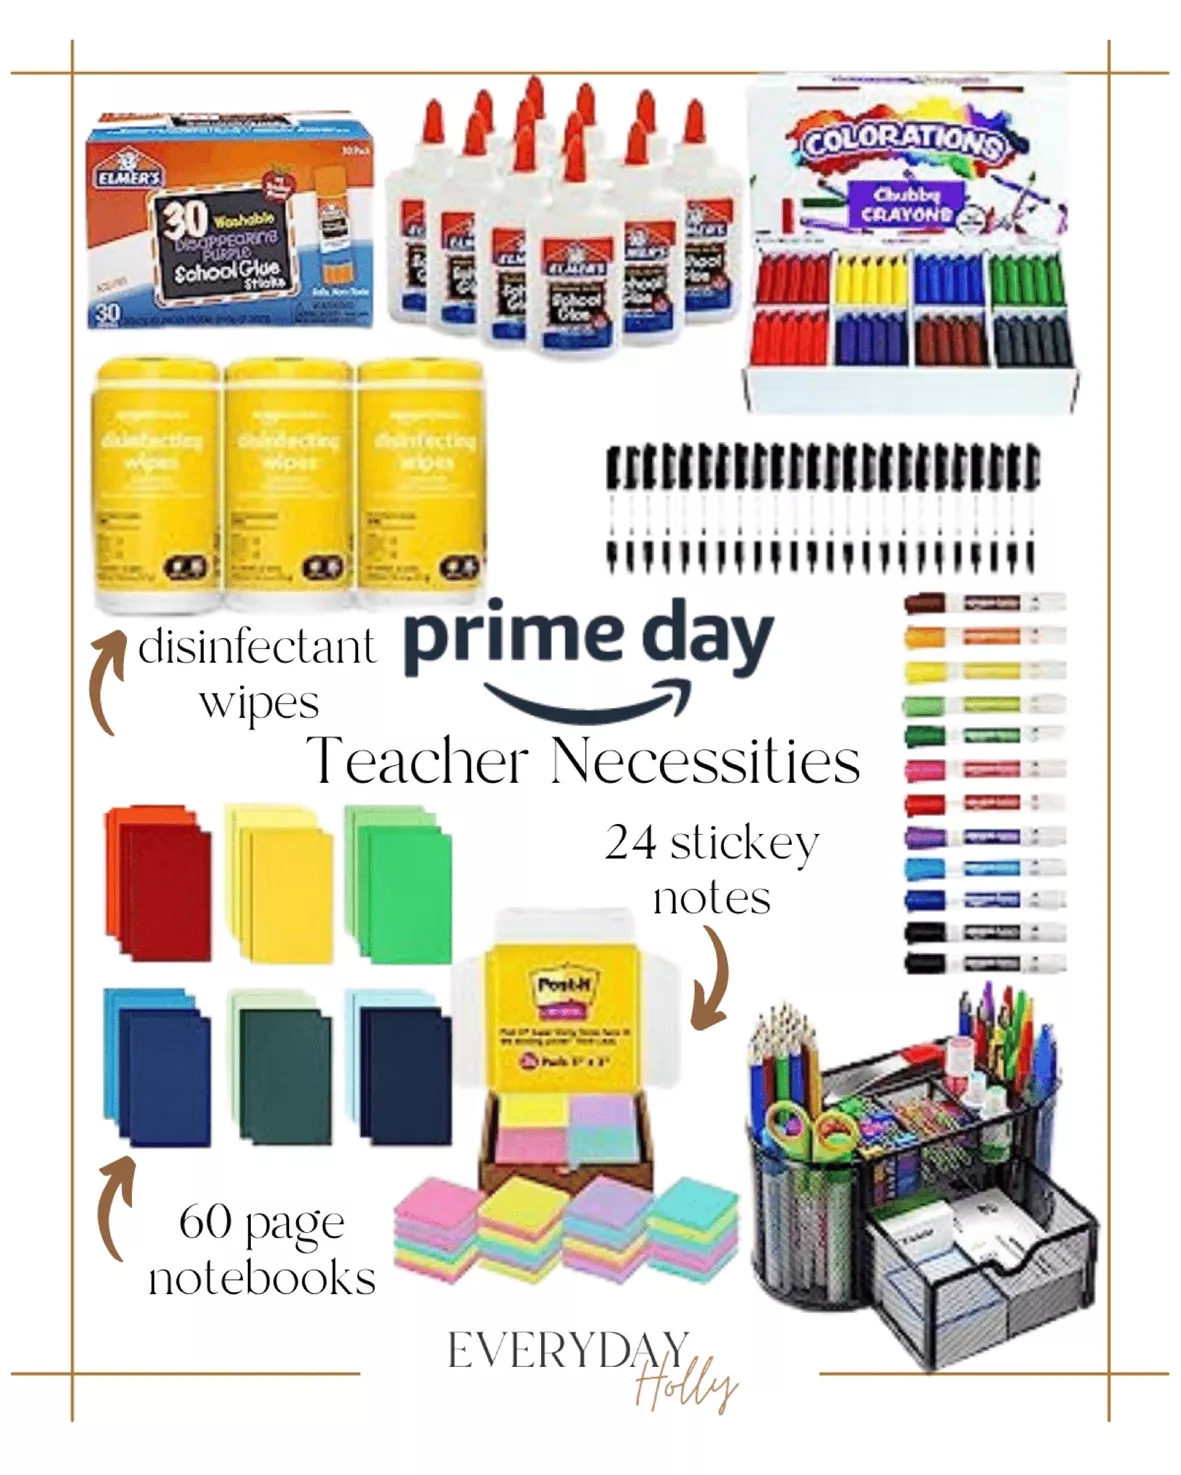 Essential back to school supplies, according to a teacher